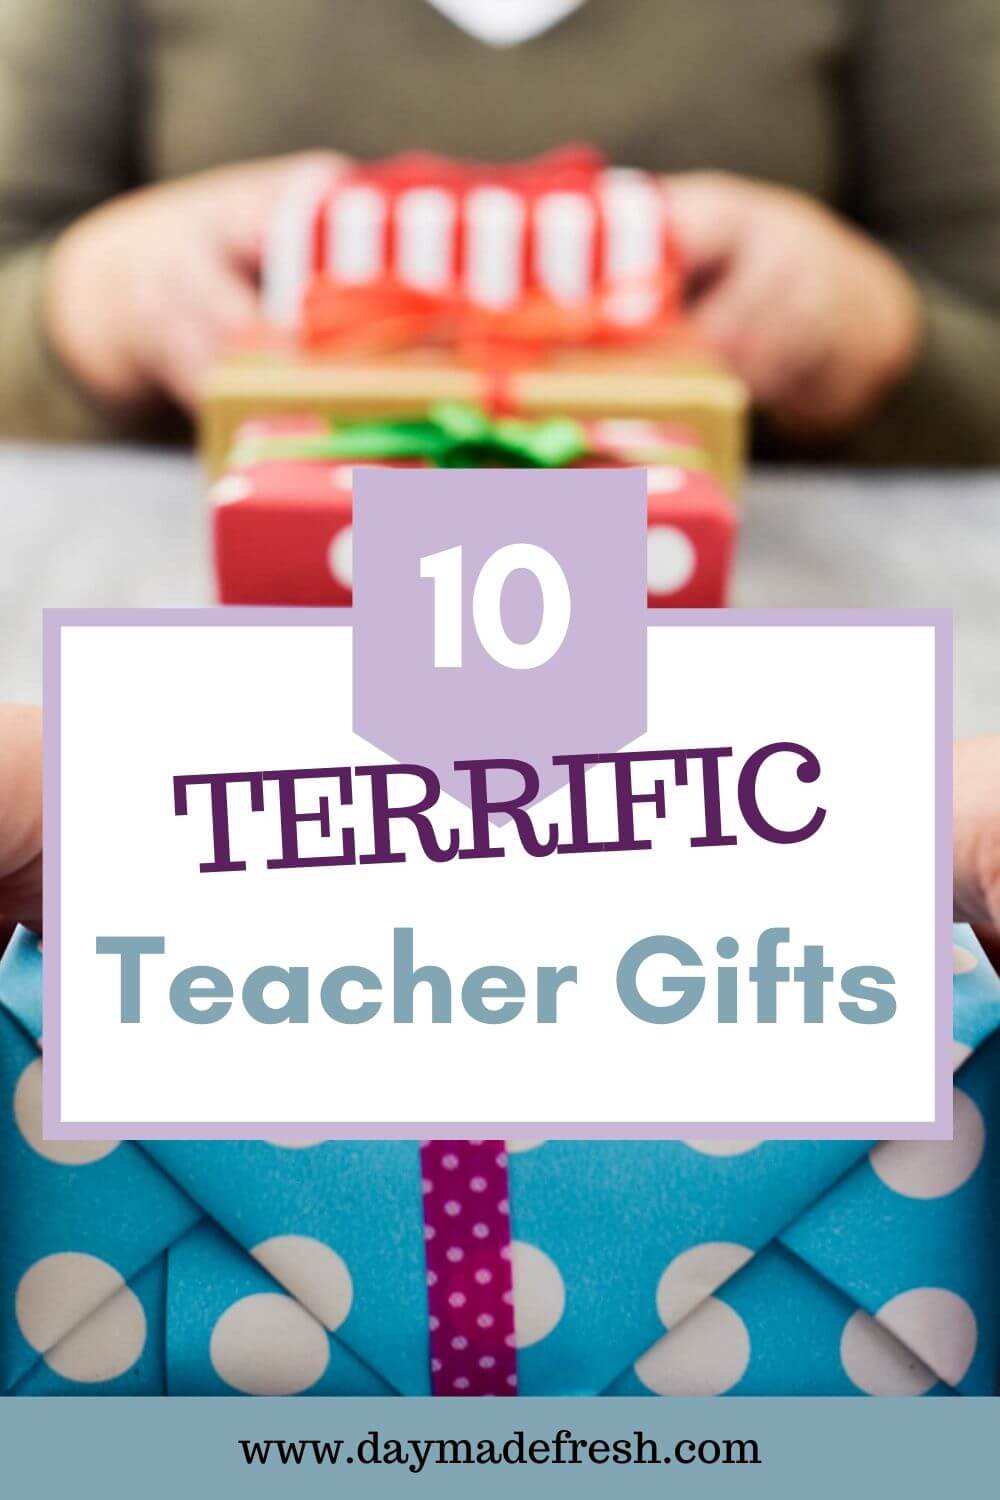 10 Terrific Teacher Gifts_Presents in the background